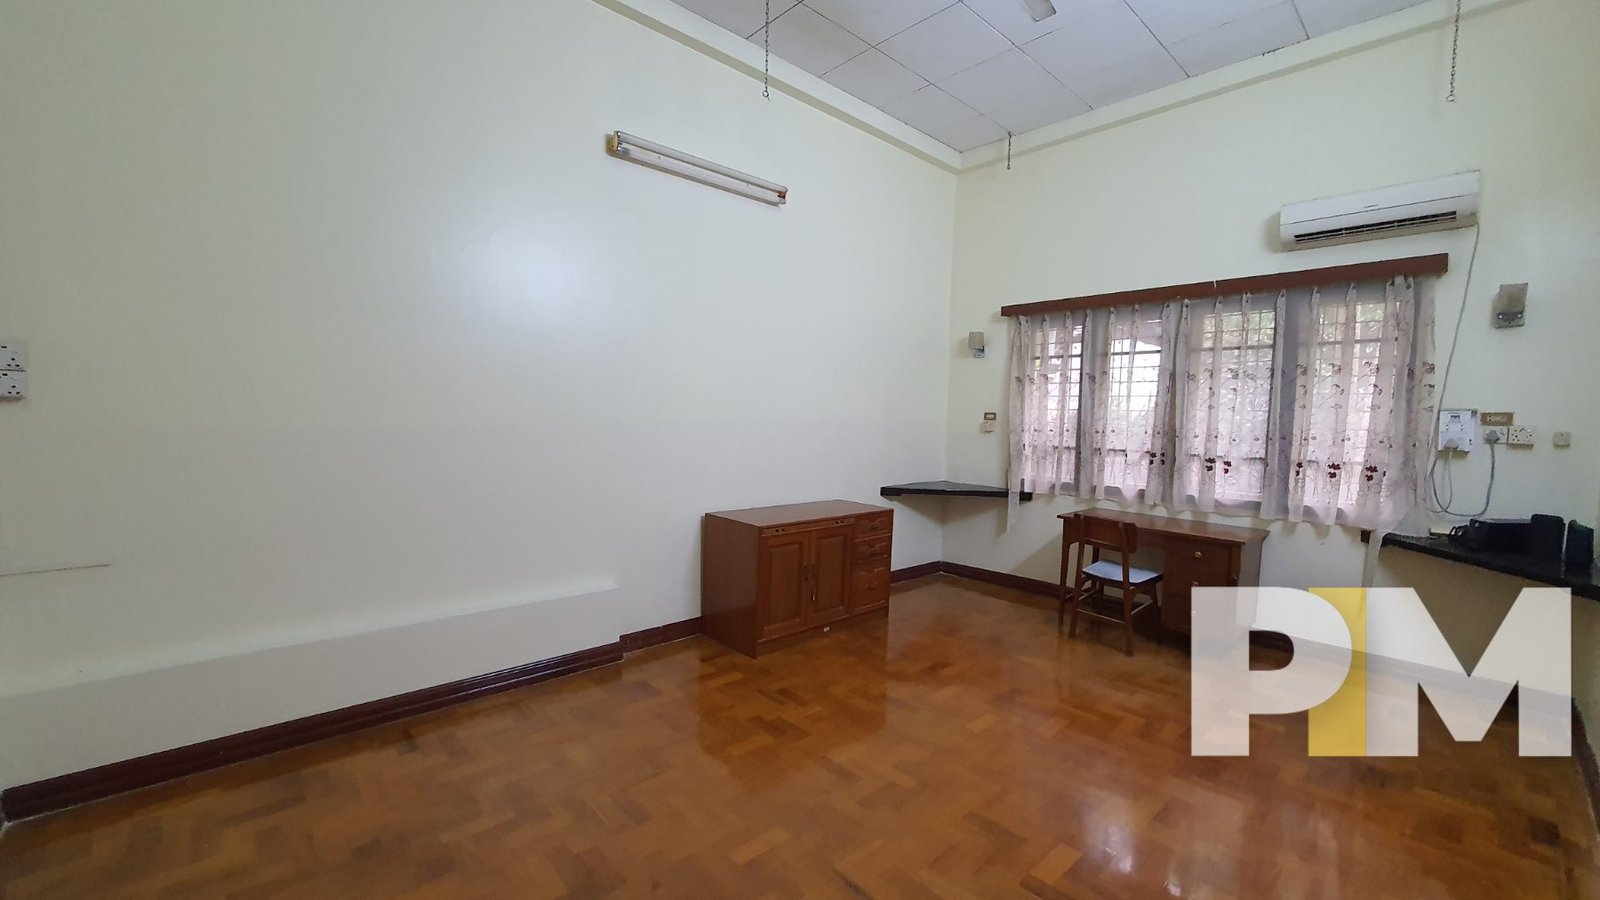 room with air conditioner - Myanmar House for rent